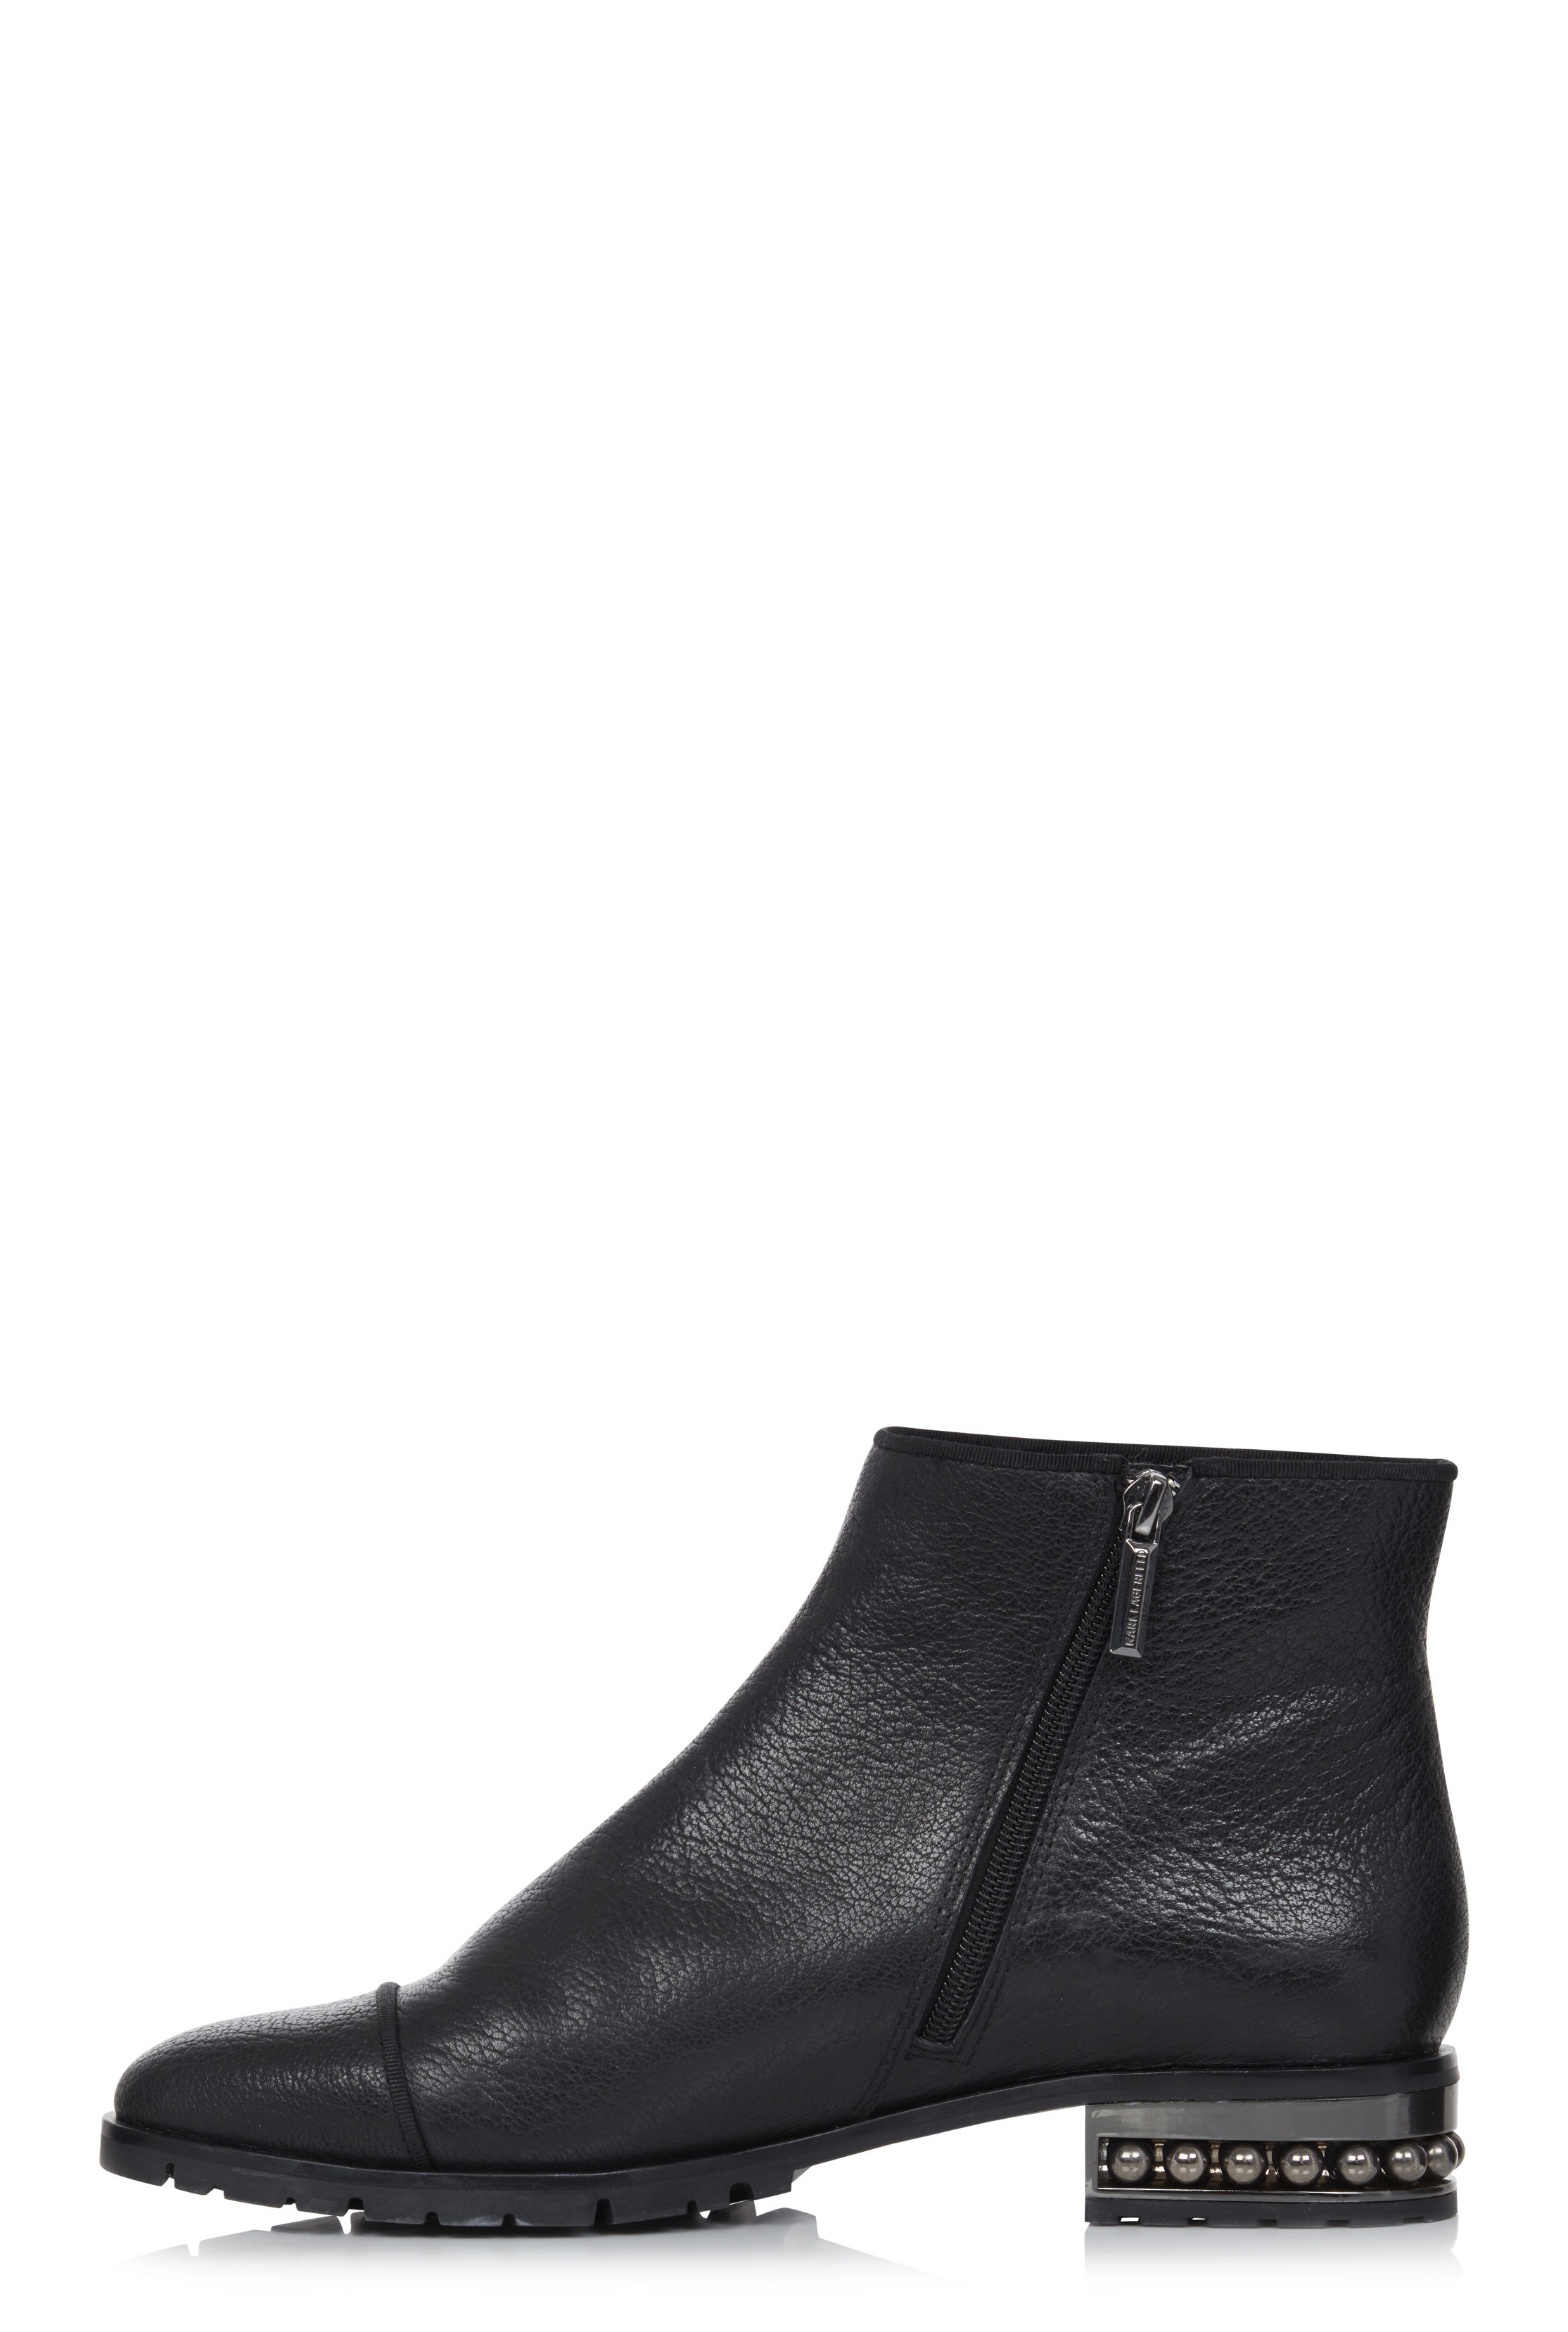 Karl Lagerfeld Paris Safia Ankle Bootie | Long Tall Sally